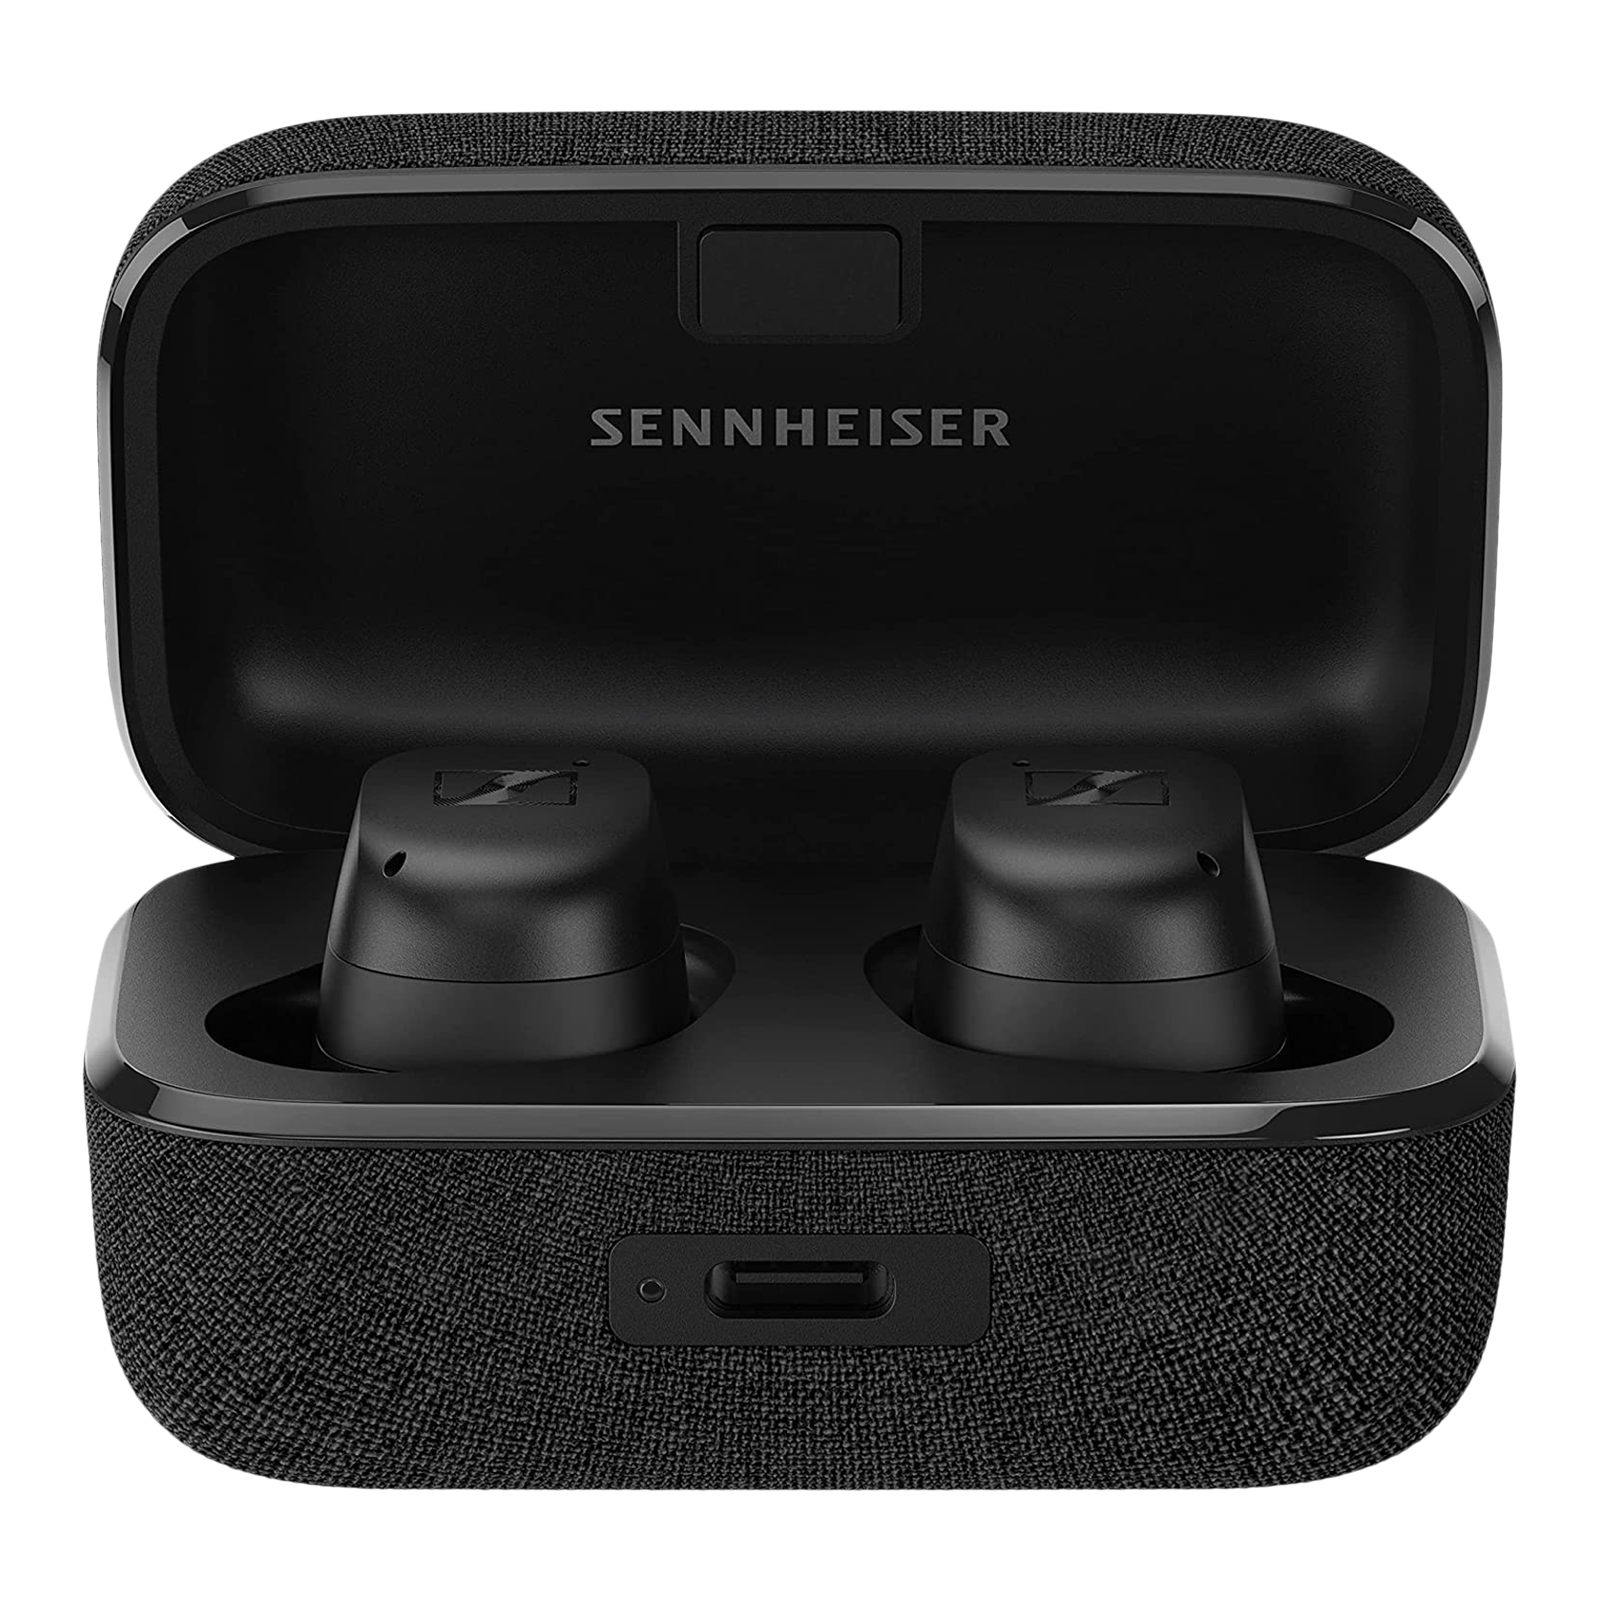 SENNHEISER MTW3 TWS Earbuds with Active Noise Cancellation (IPX4 Splash Resistant, 28 Hours Playback, Black)